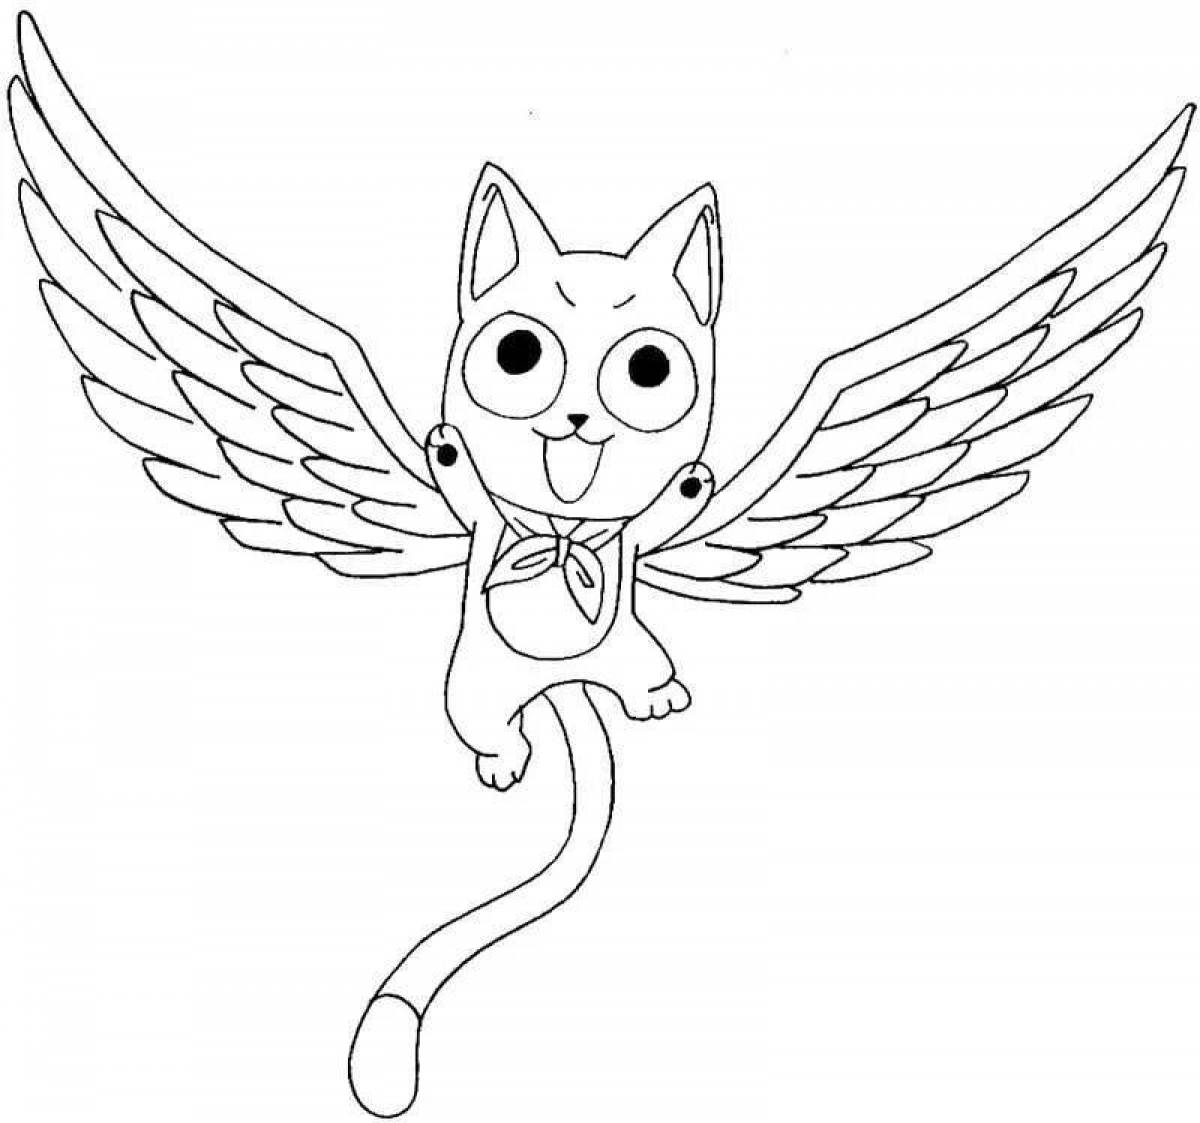 Great coloring cat with wings